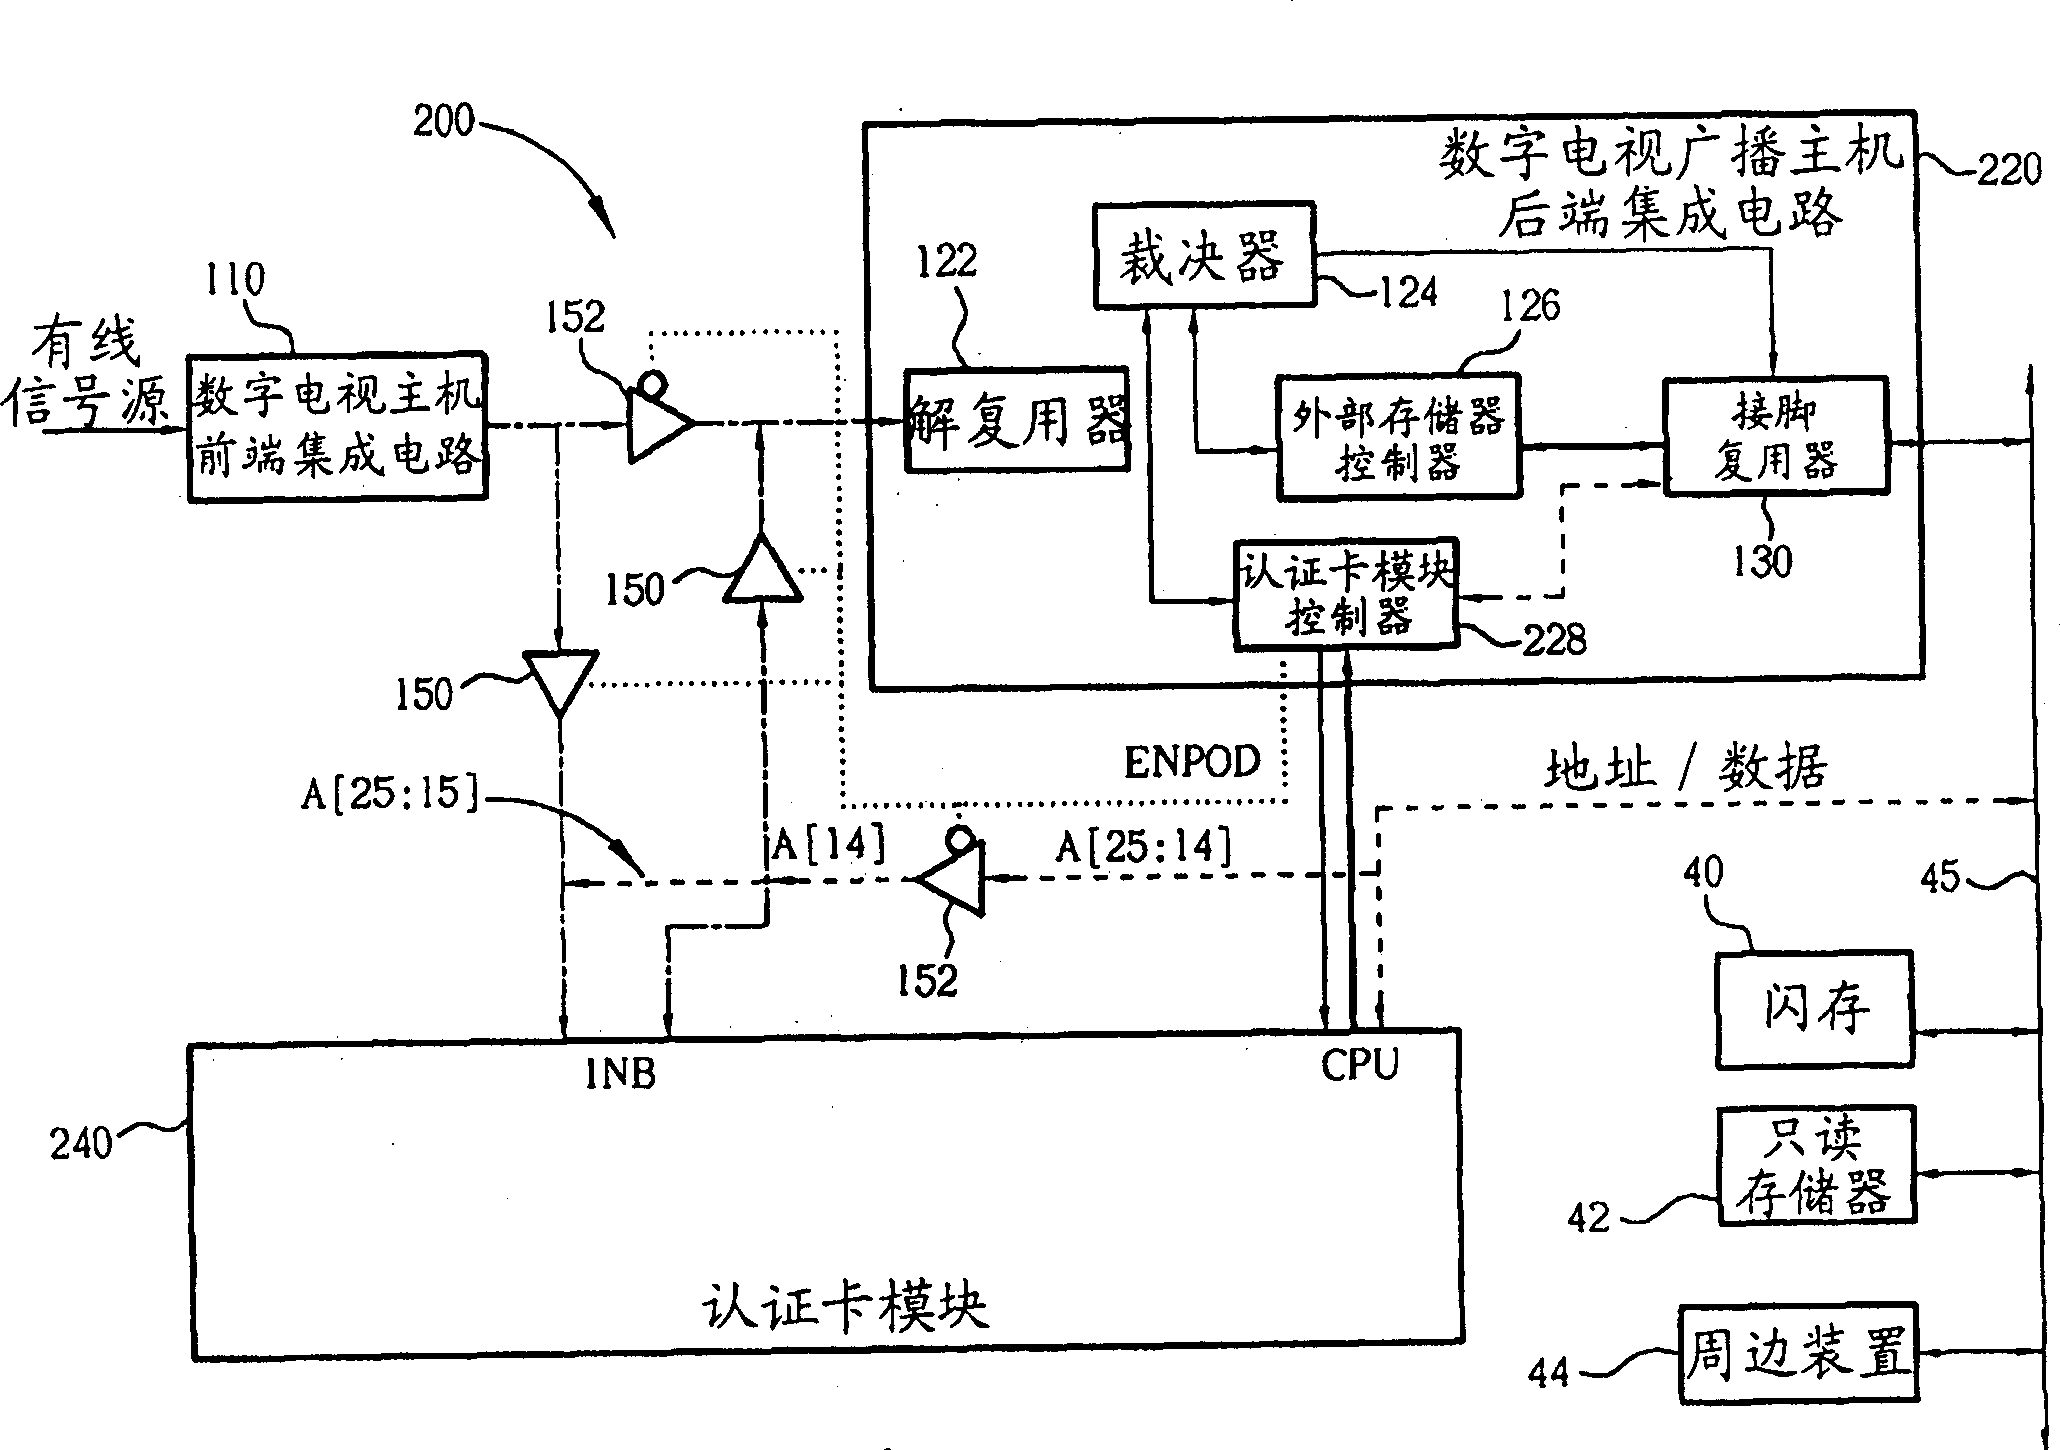 Apparatus and related method for sharing address and data pins of a cryptocard module and external memory